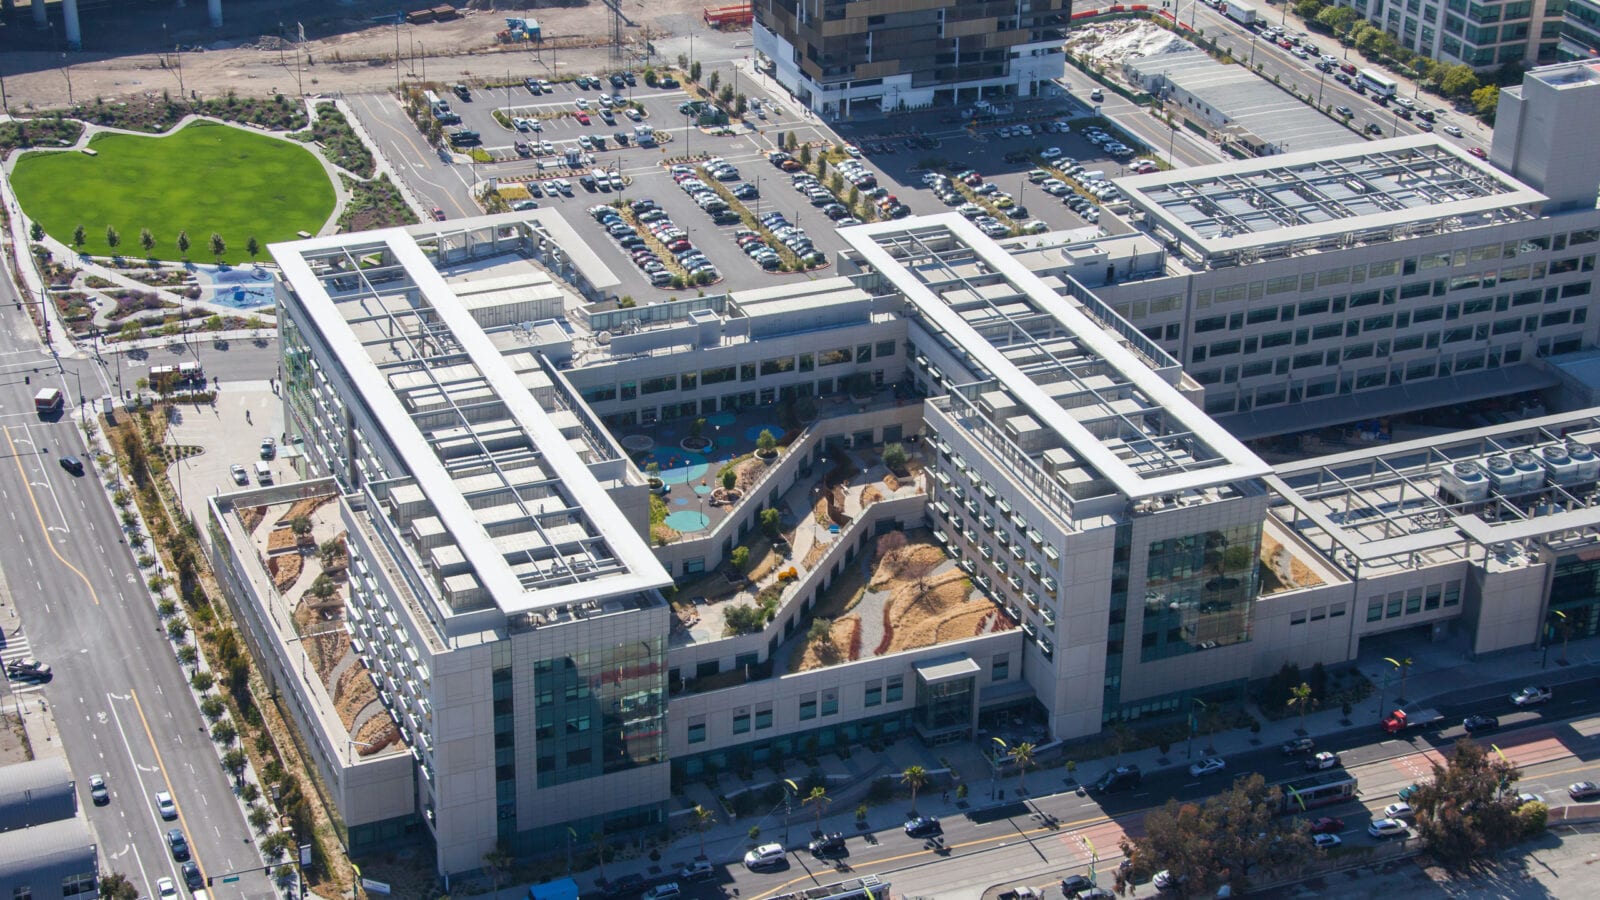 UCSF Medical Center at Mission Bay William McDonough + Partners